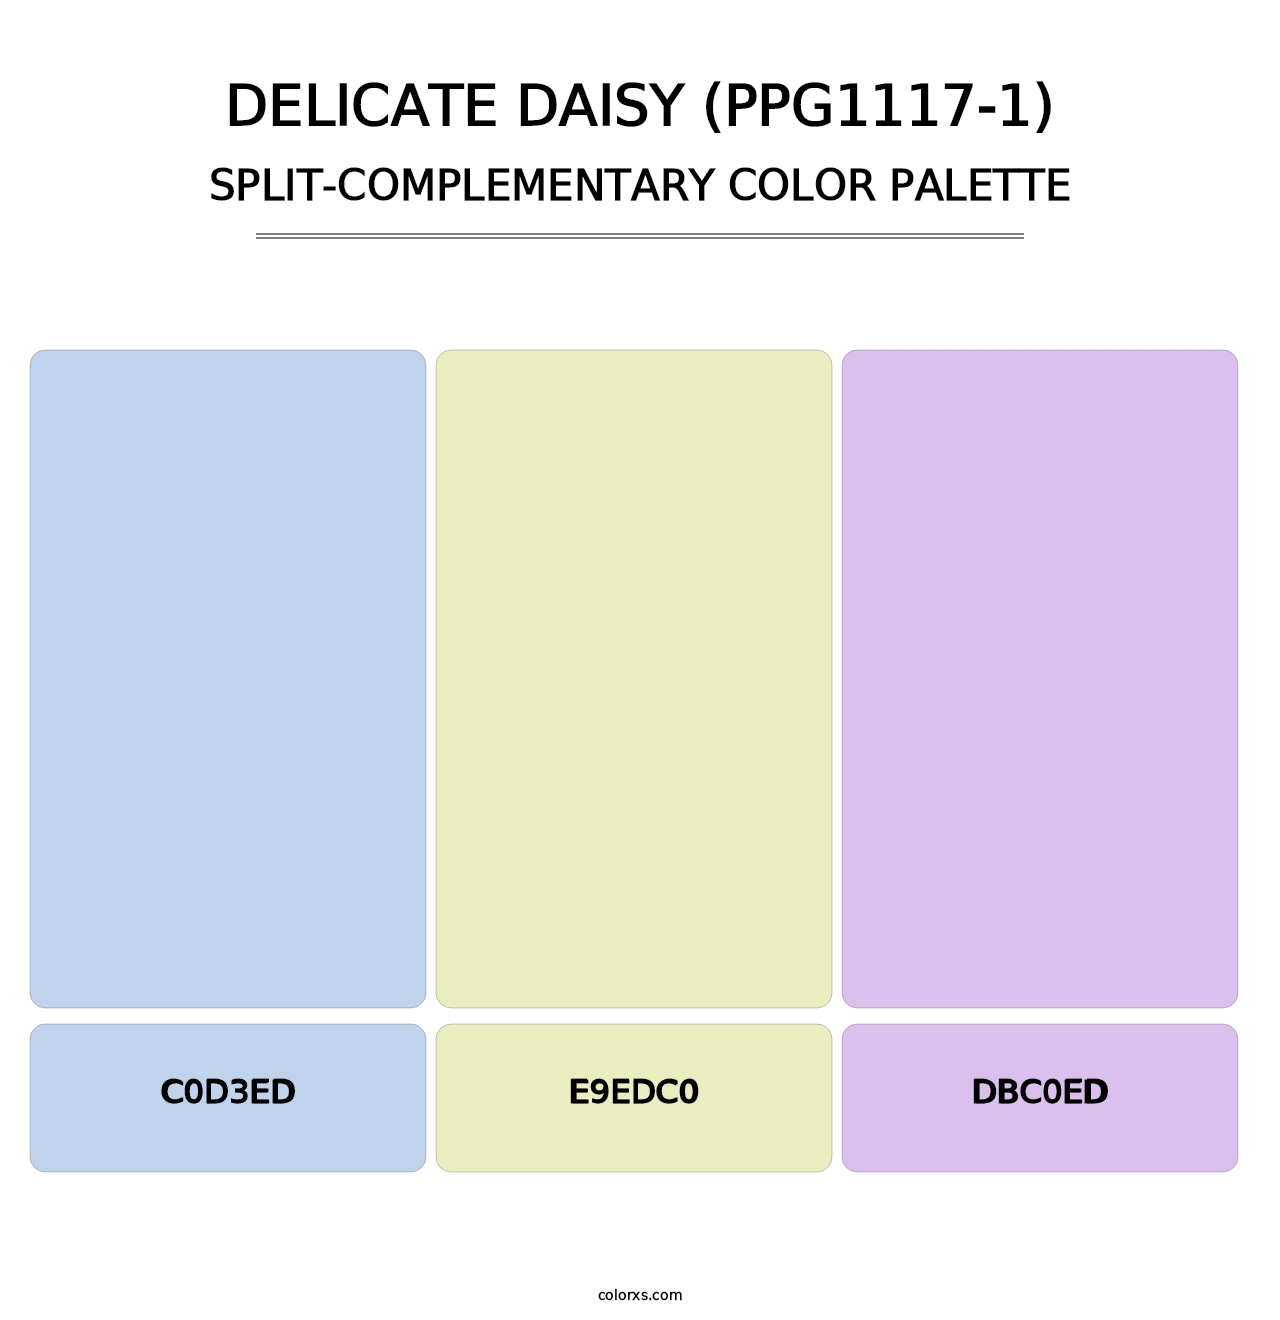 Delicate Daisy (PPG1117-1) - Split-Complementary Color Palette